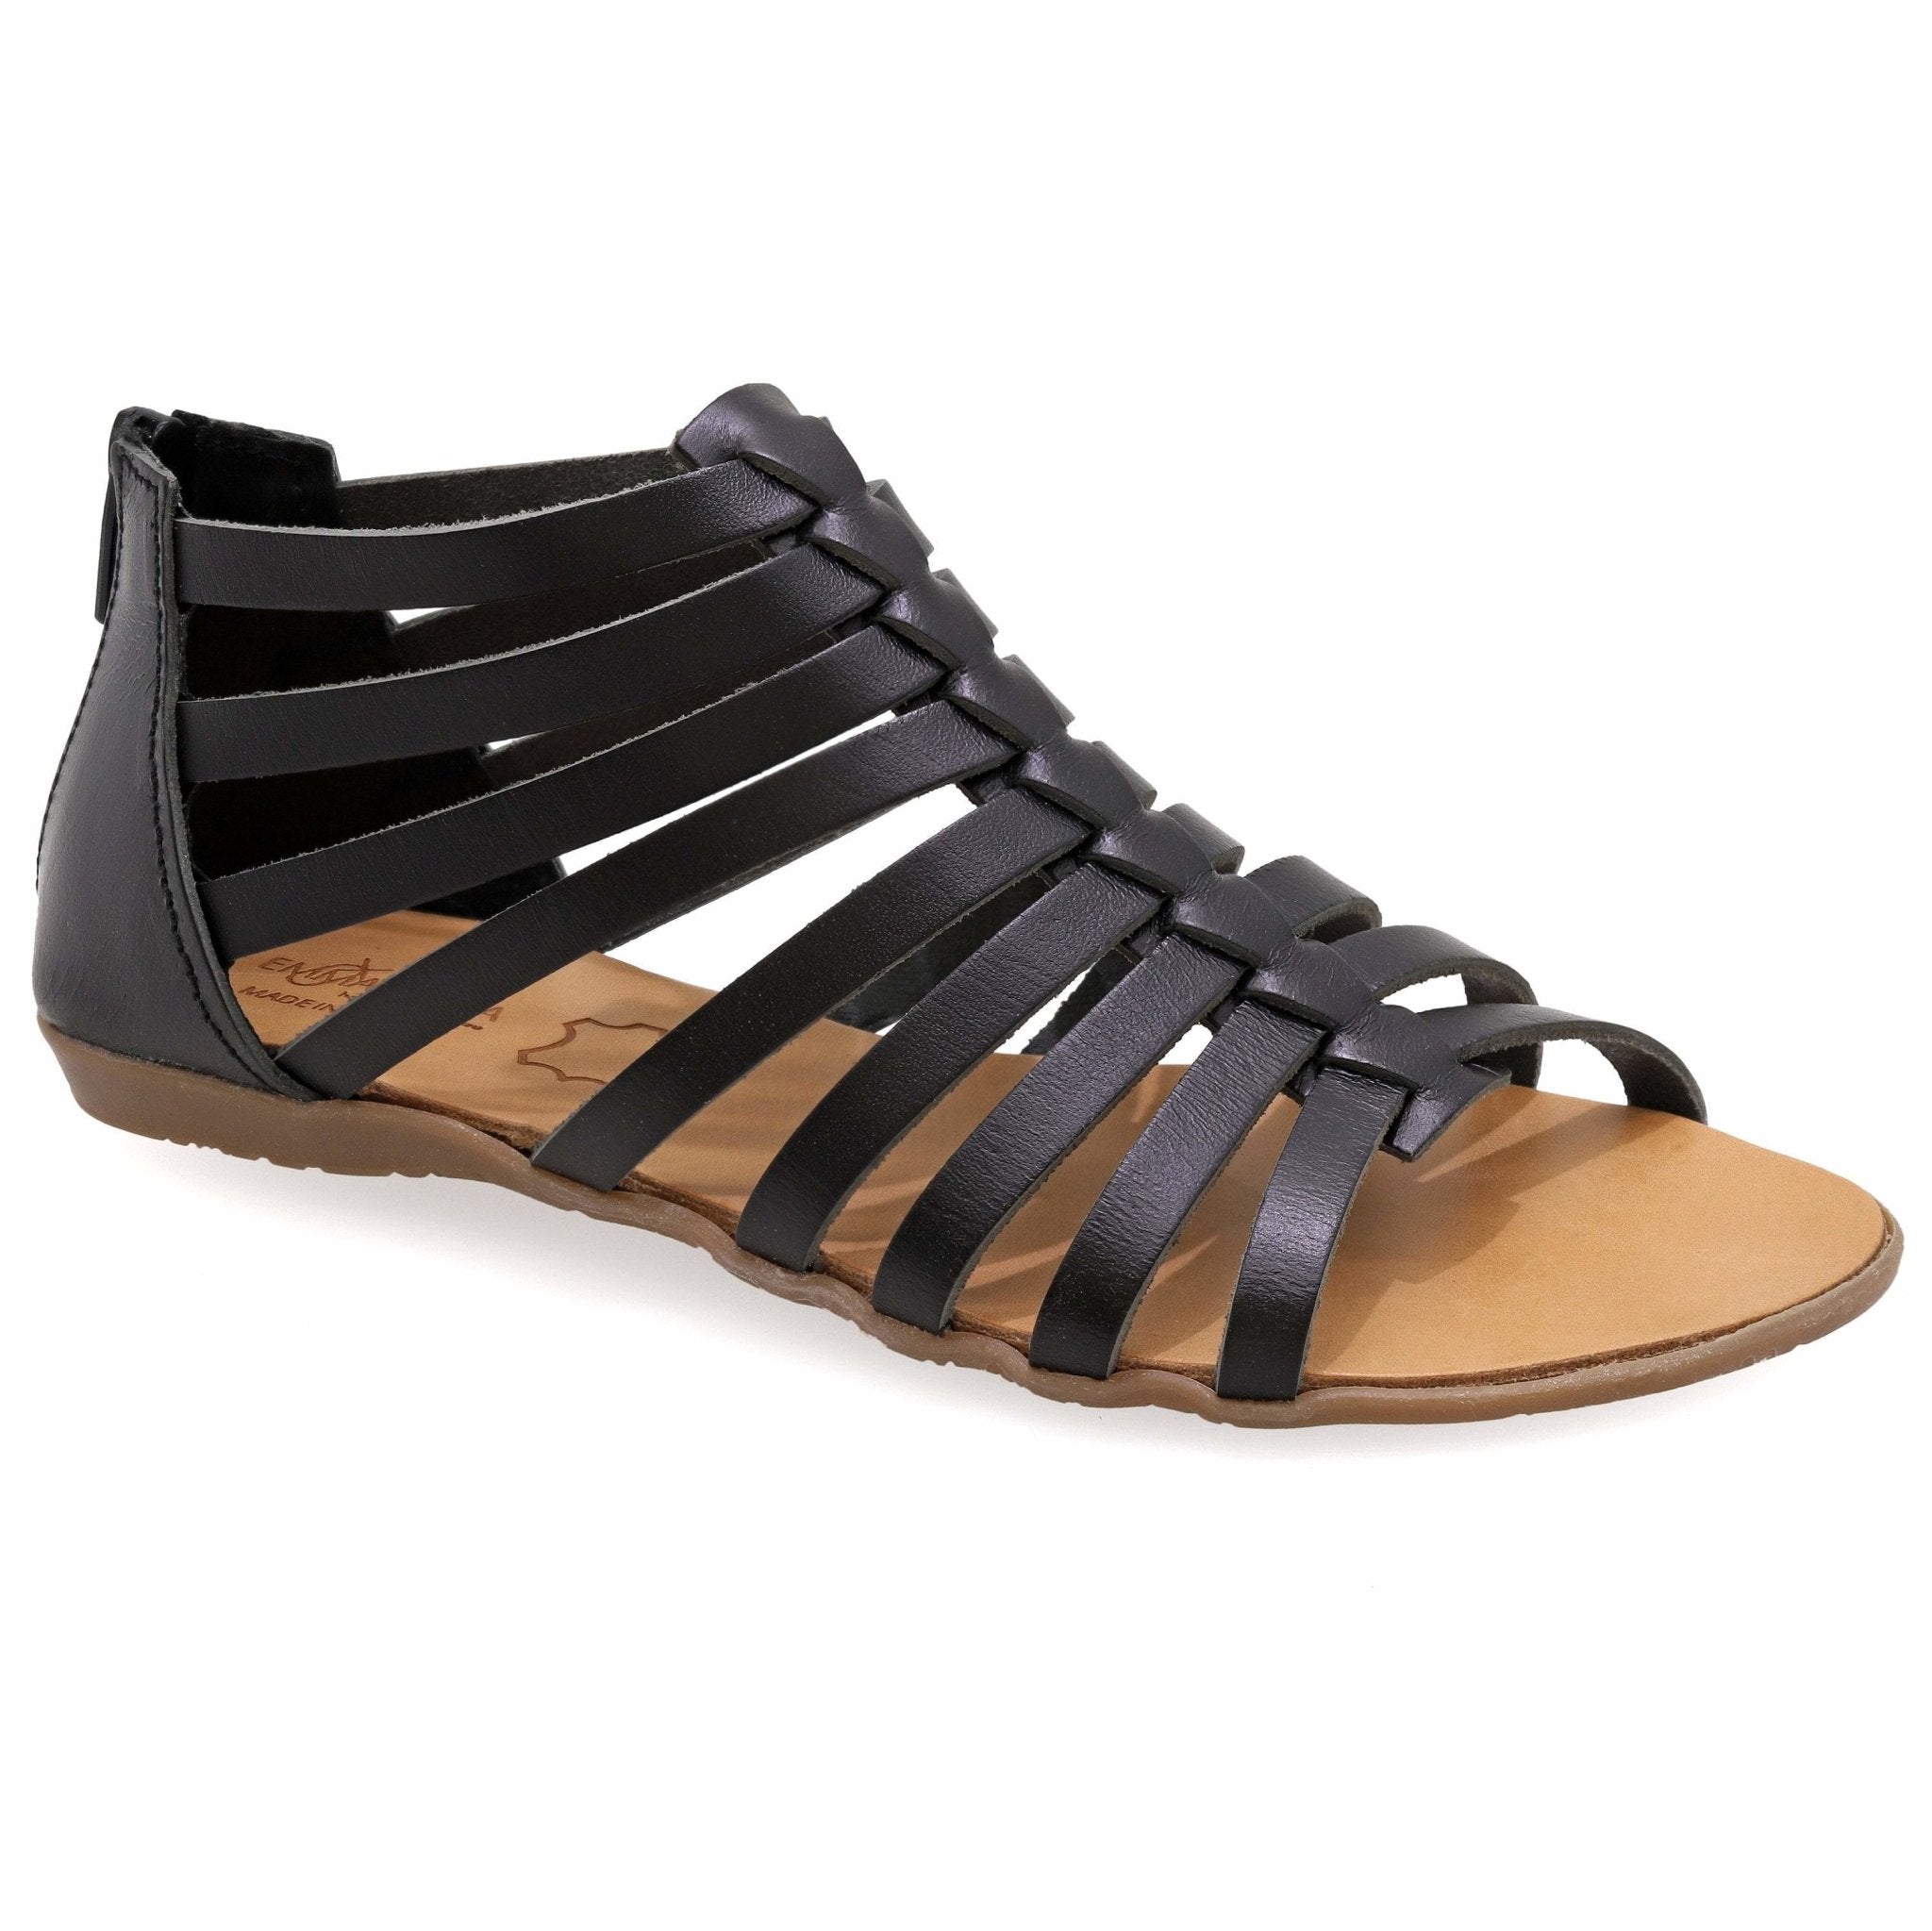 leather ankle high gladiator sandals with zippers circe leather sandals 219747